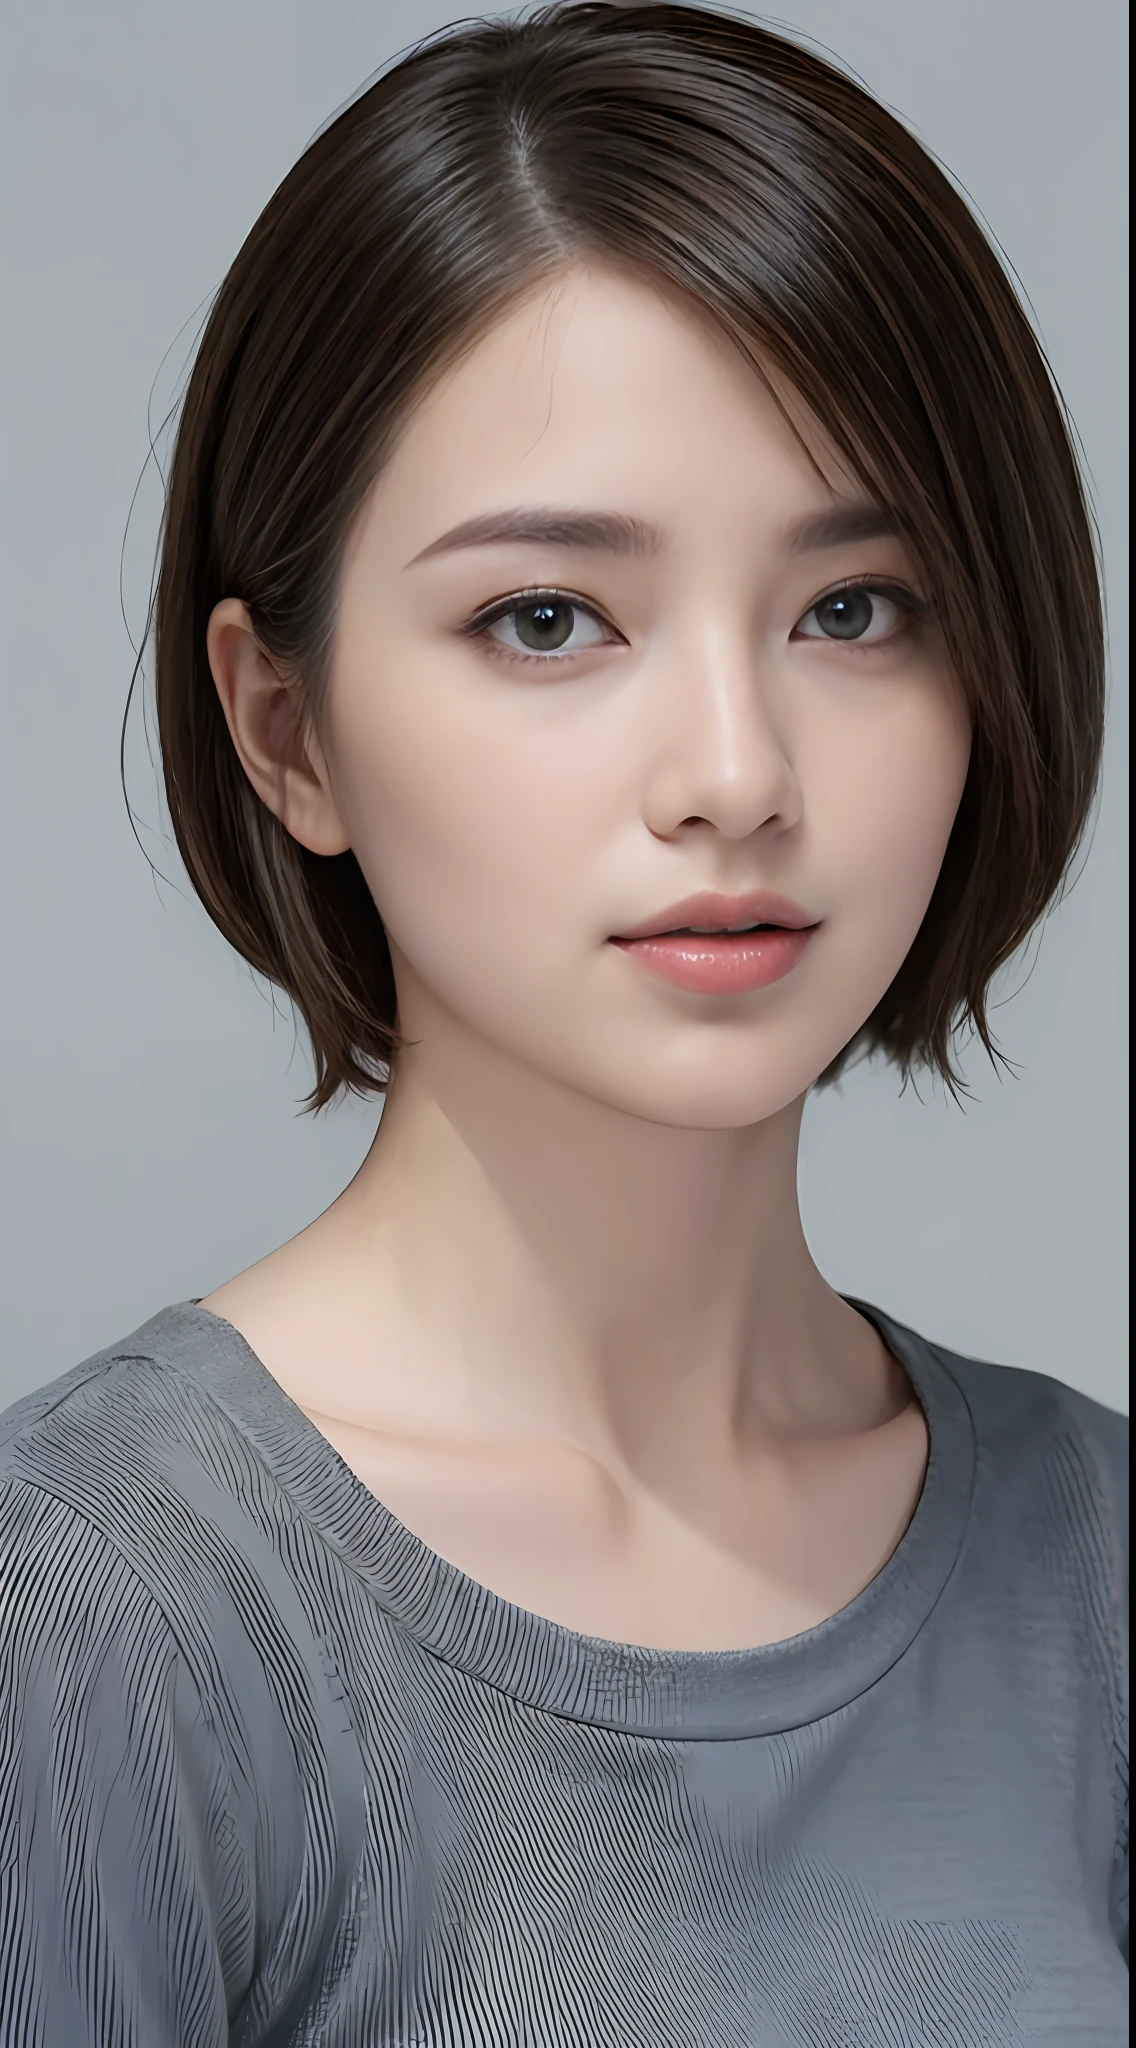 ((Best Quality, 8k, Masterpiece: 1.3)), Upper Body, Focus Sharp: 1.2, Outstanding Beauty: 1.4, A Little Chubby, ((Big: 1.2)), Short Hair, Bob Hair, Straight Hair, Very Detailed Face and Skin Texture, Detailed Eyes, Double Eyelids, One Beautiful Woman, Solo, T-Shirt